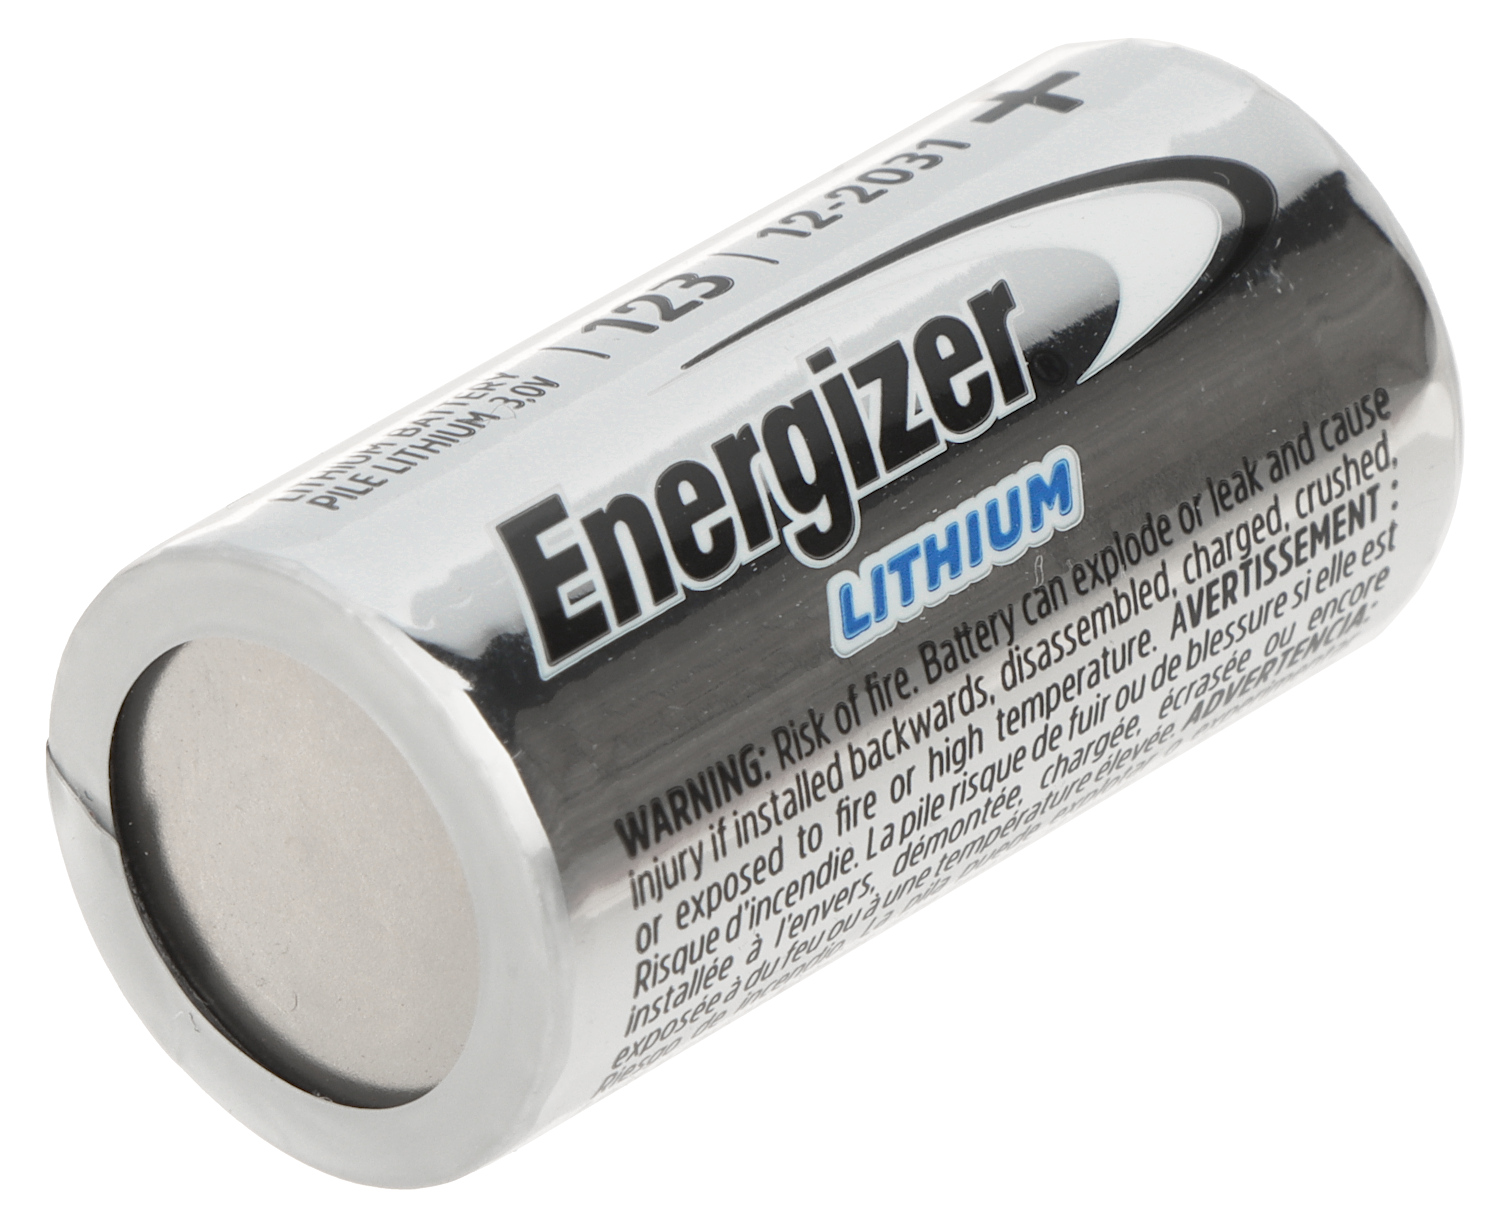 LITHIUM BATTERY BAT-CR123A/E*P2 3 V CR123A ENERGIZER - Lithium and Other  Batteries - Delta